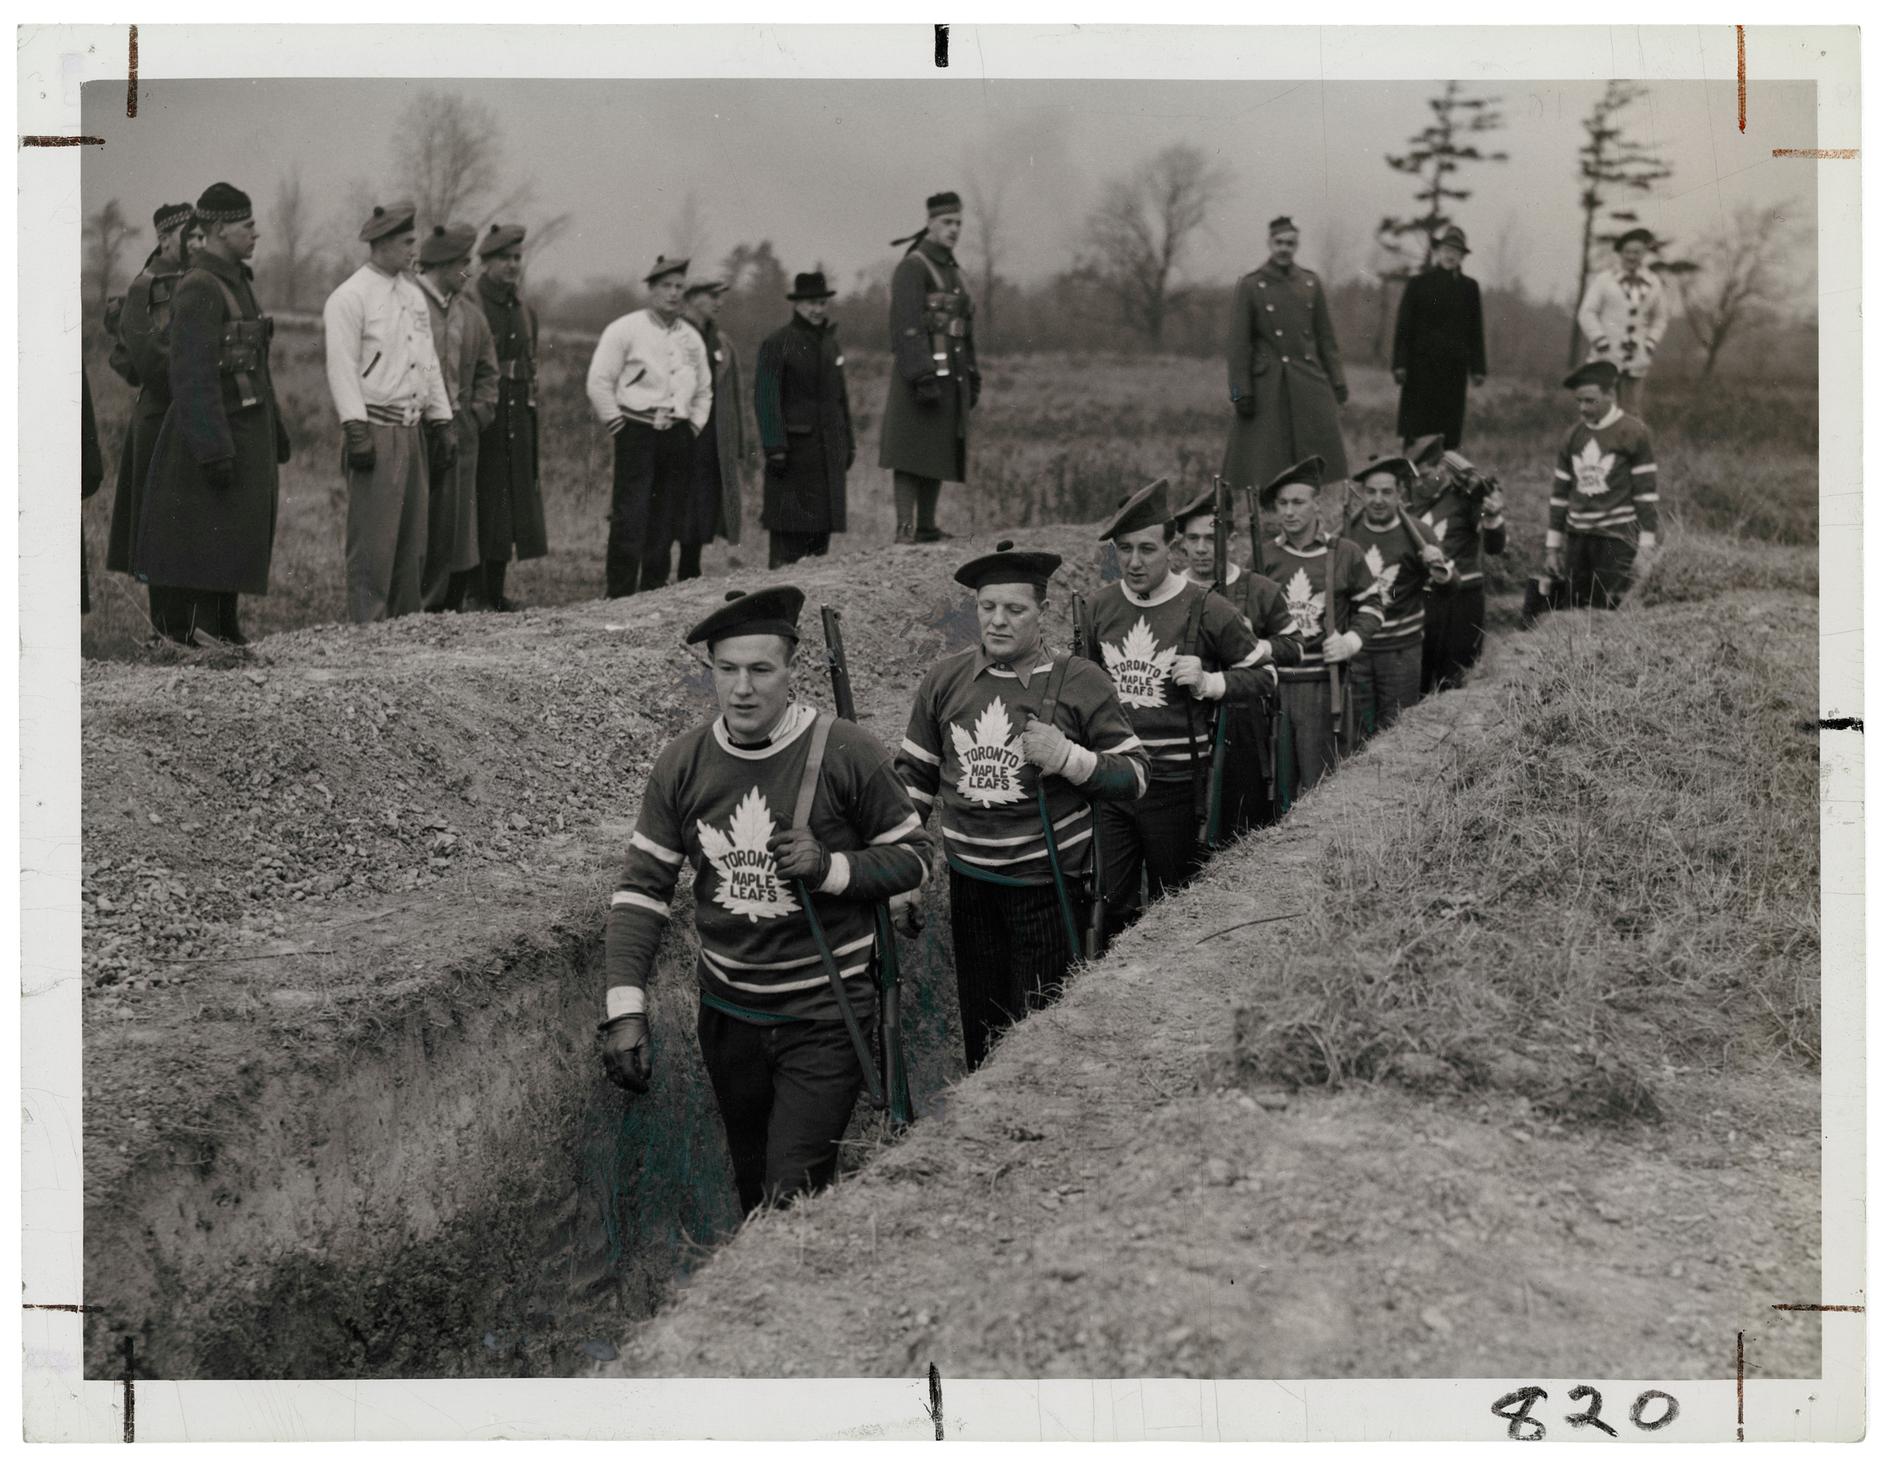 Members of the Toronto Maple Leaf hockey team in the trenches during a military training session in 1939.